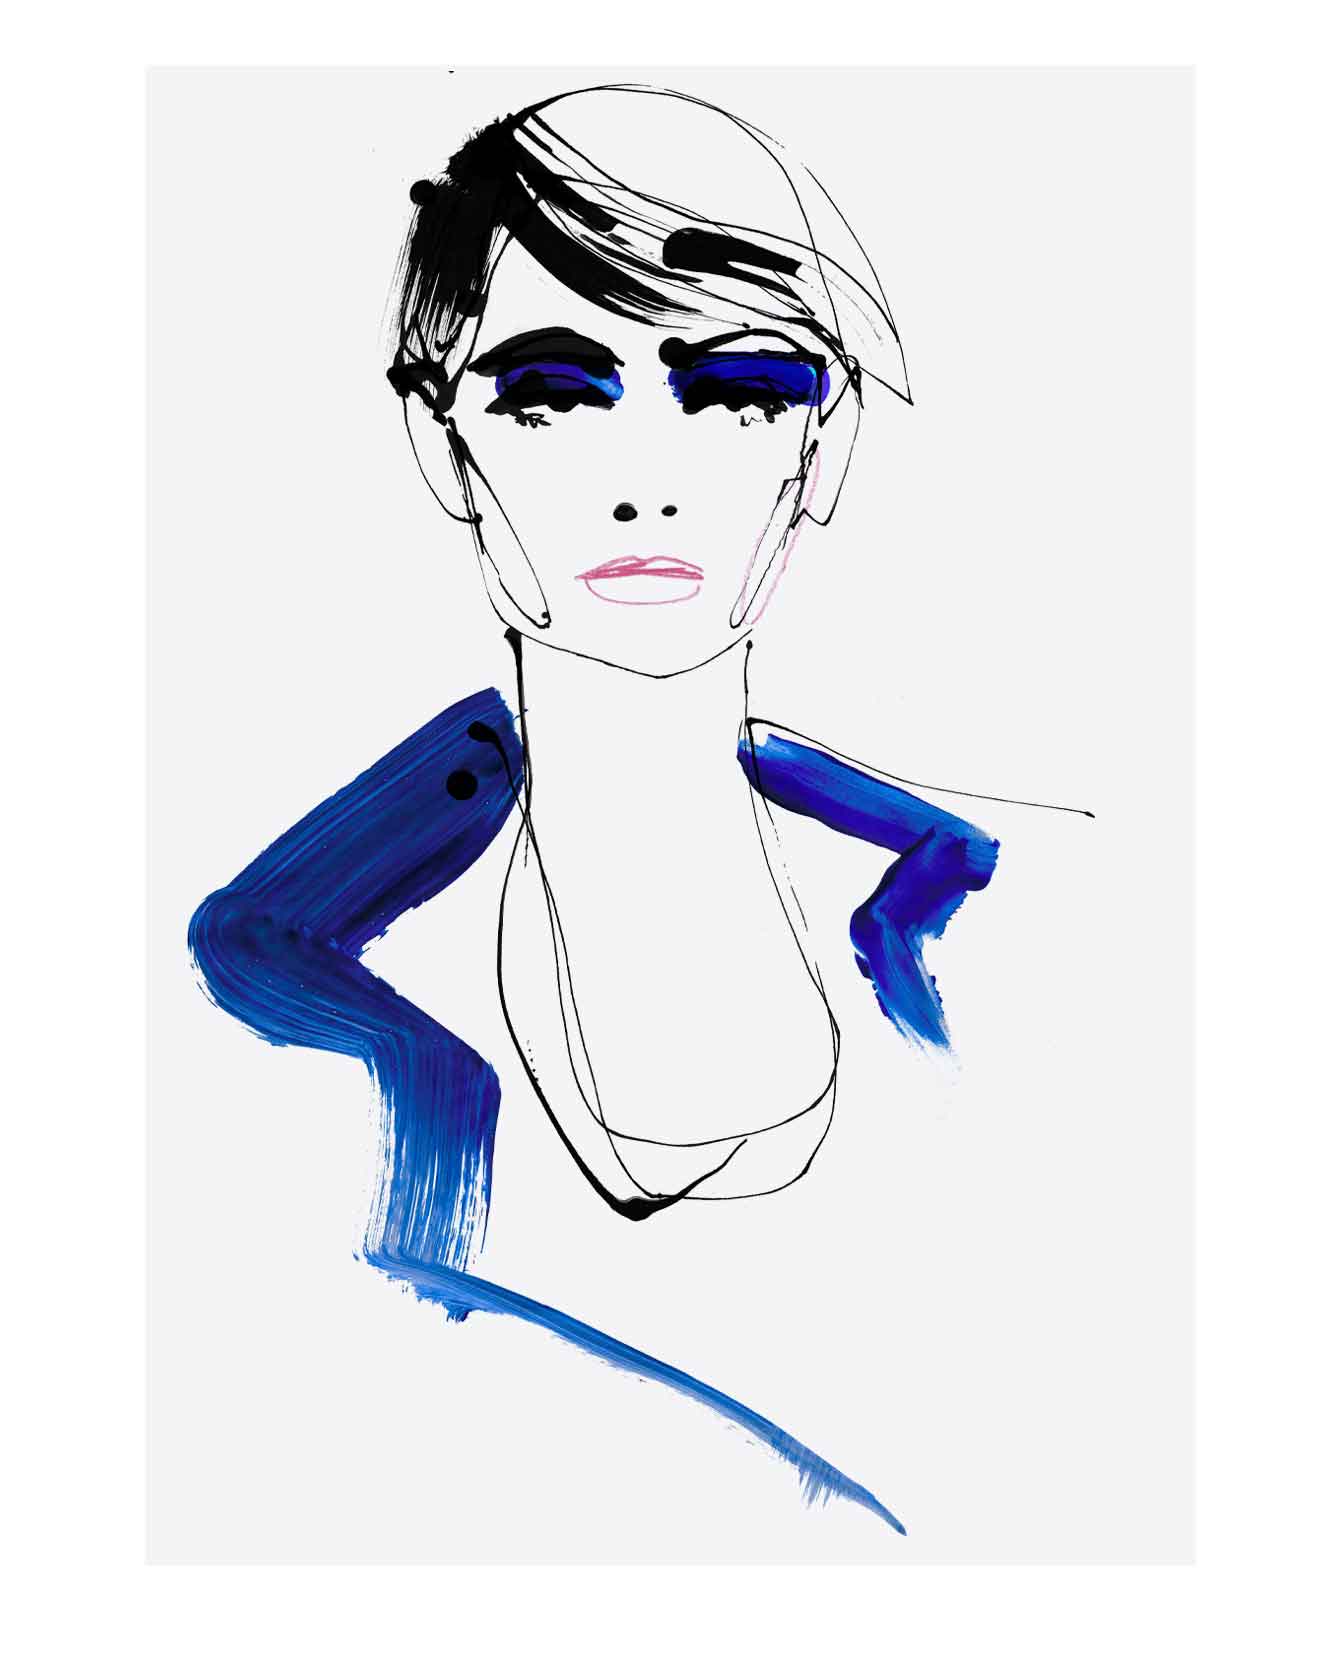 Fashion illustration in ink and watercolour. Energetic linear illustration style. Black and blue lines.